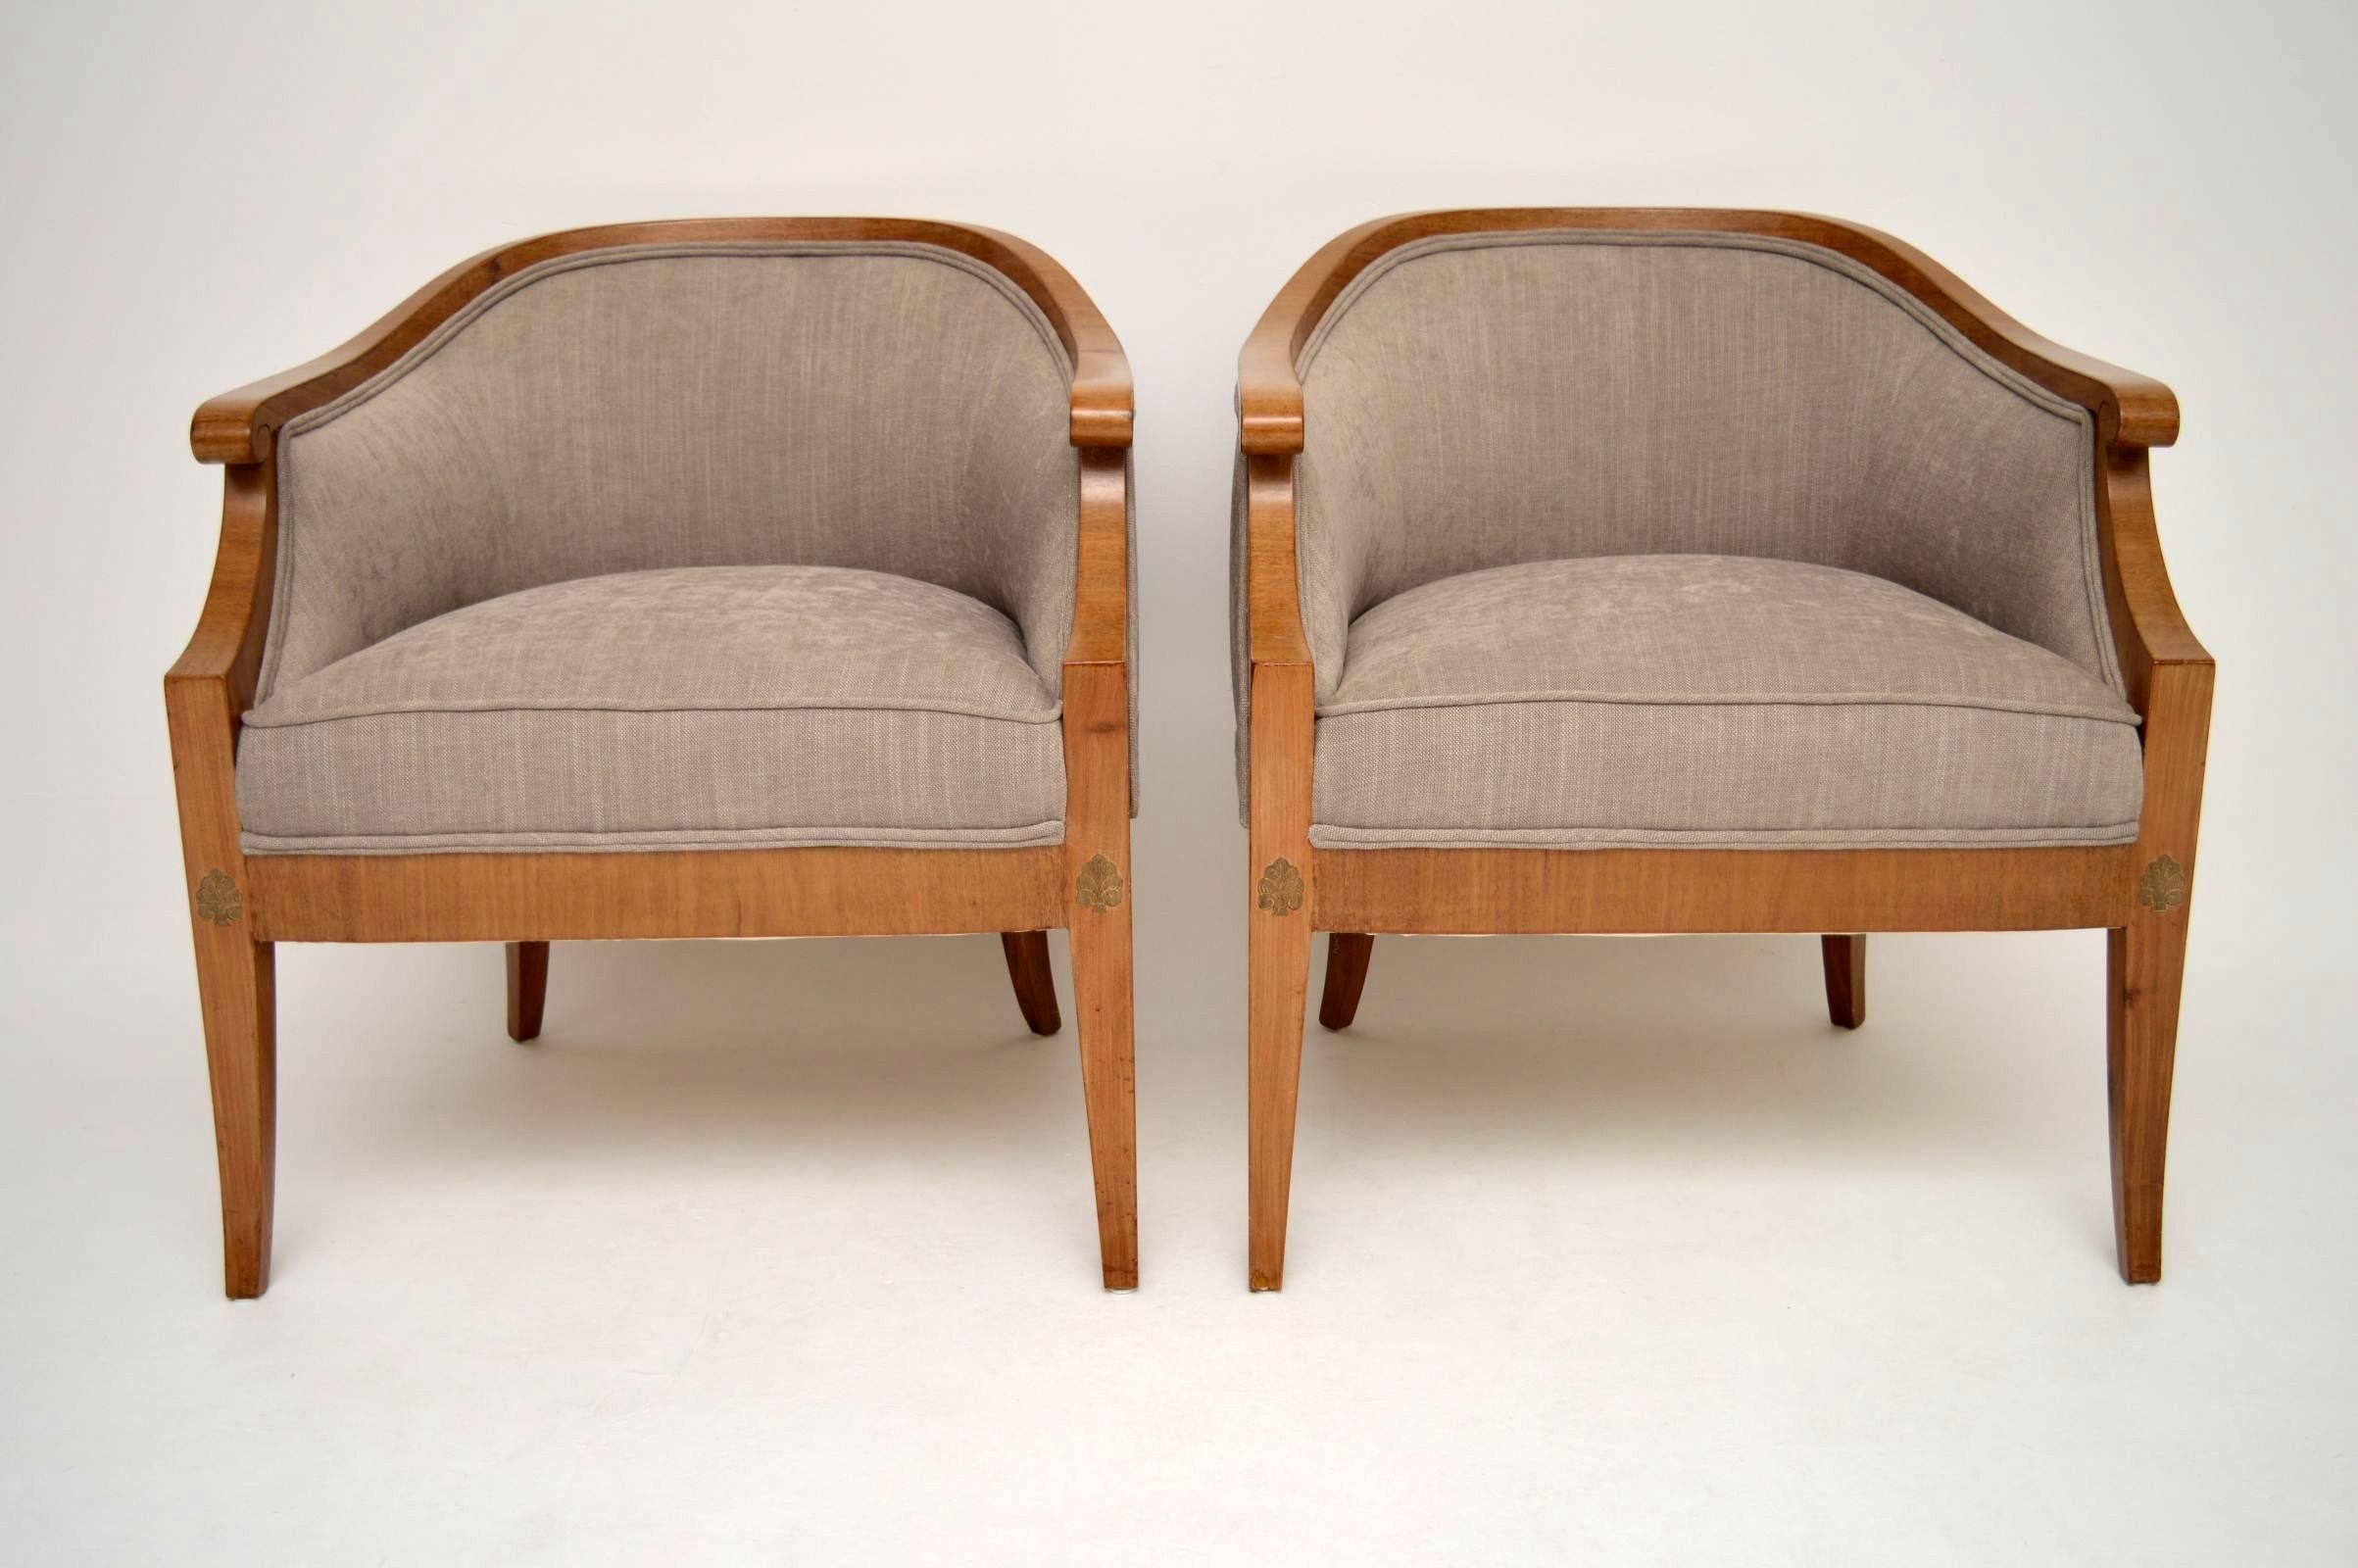 Very smart and elegant pair of antique Swedish armchairs in satin birch, dating from circa 1910 period or possibly earlier. They have tub shaped backs and sabre legs. There are some small inlaid motives on the tops of all the legs, back and front.